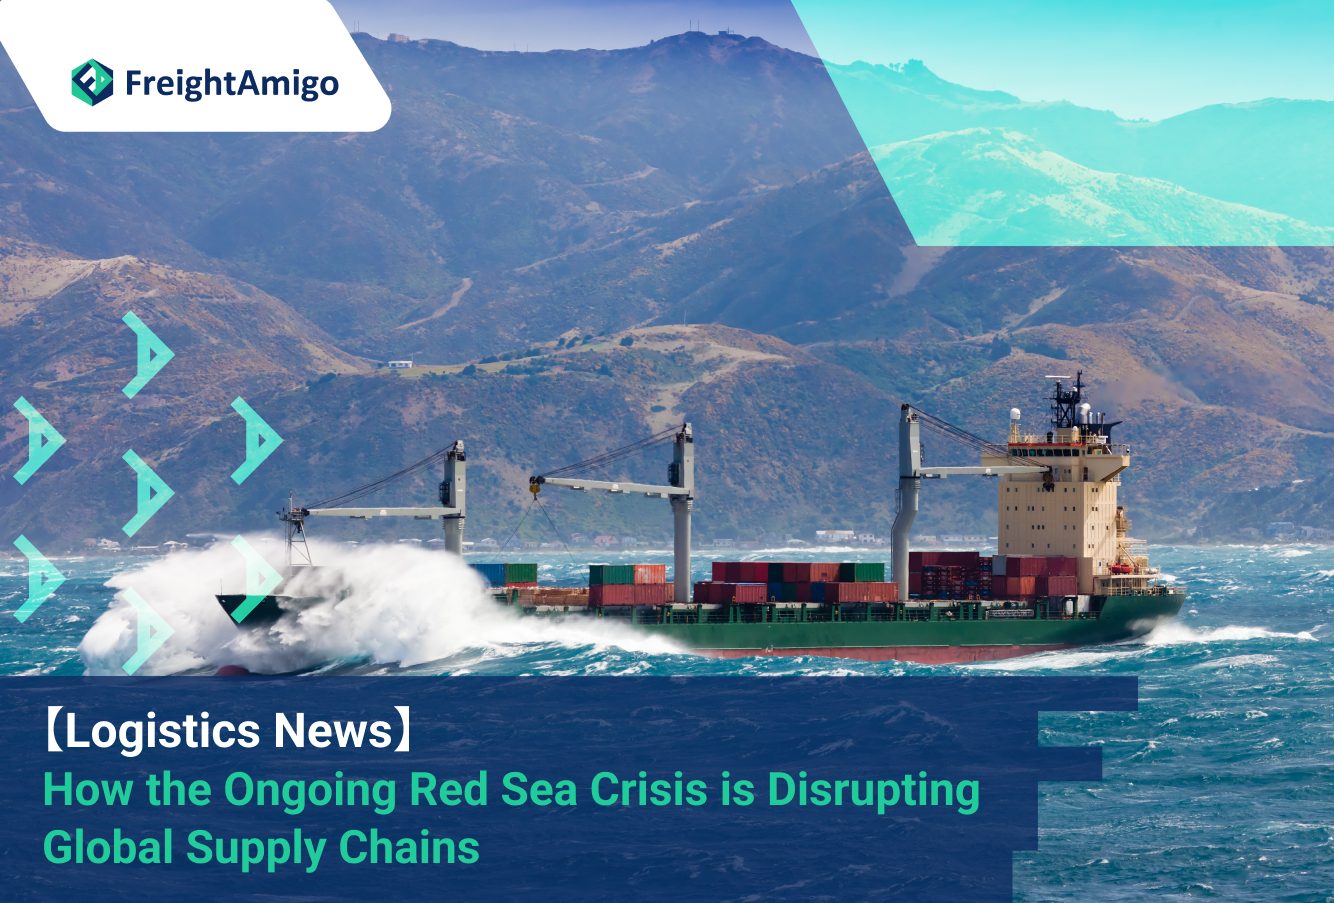 【Logistics News】 How the Ongoing Red Sea Crisis is Disrupting Global Supply Chains